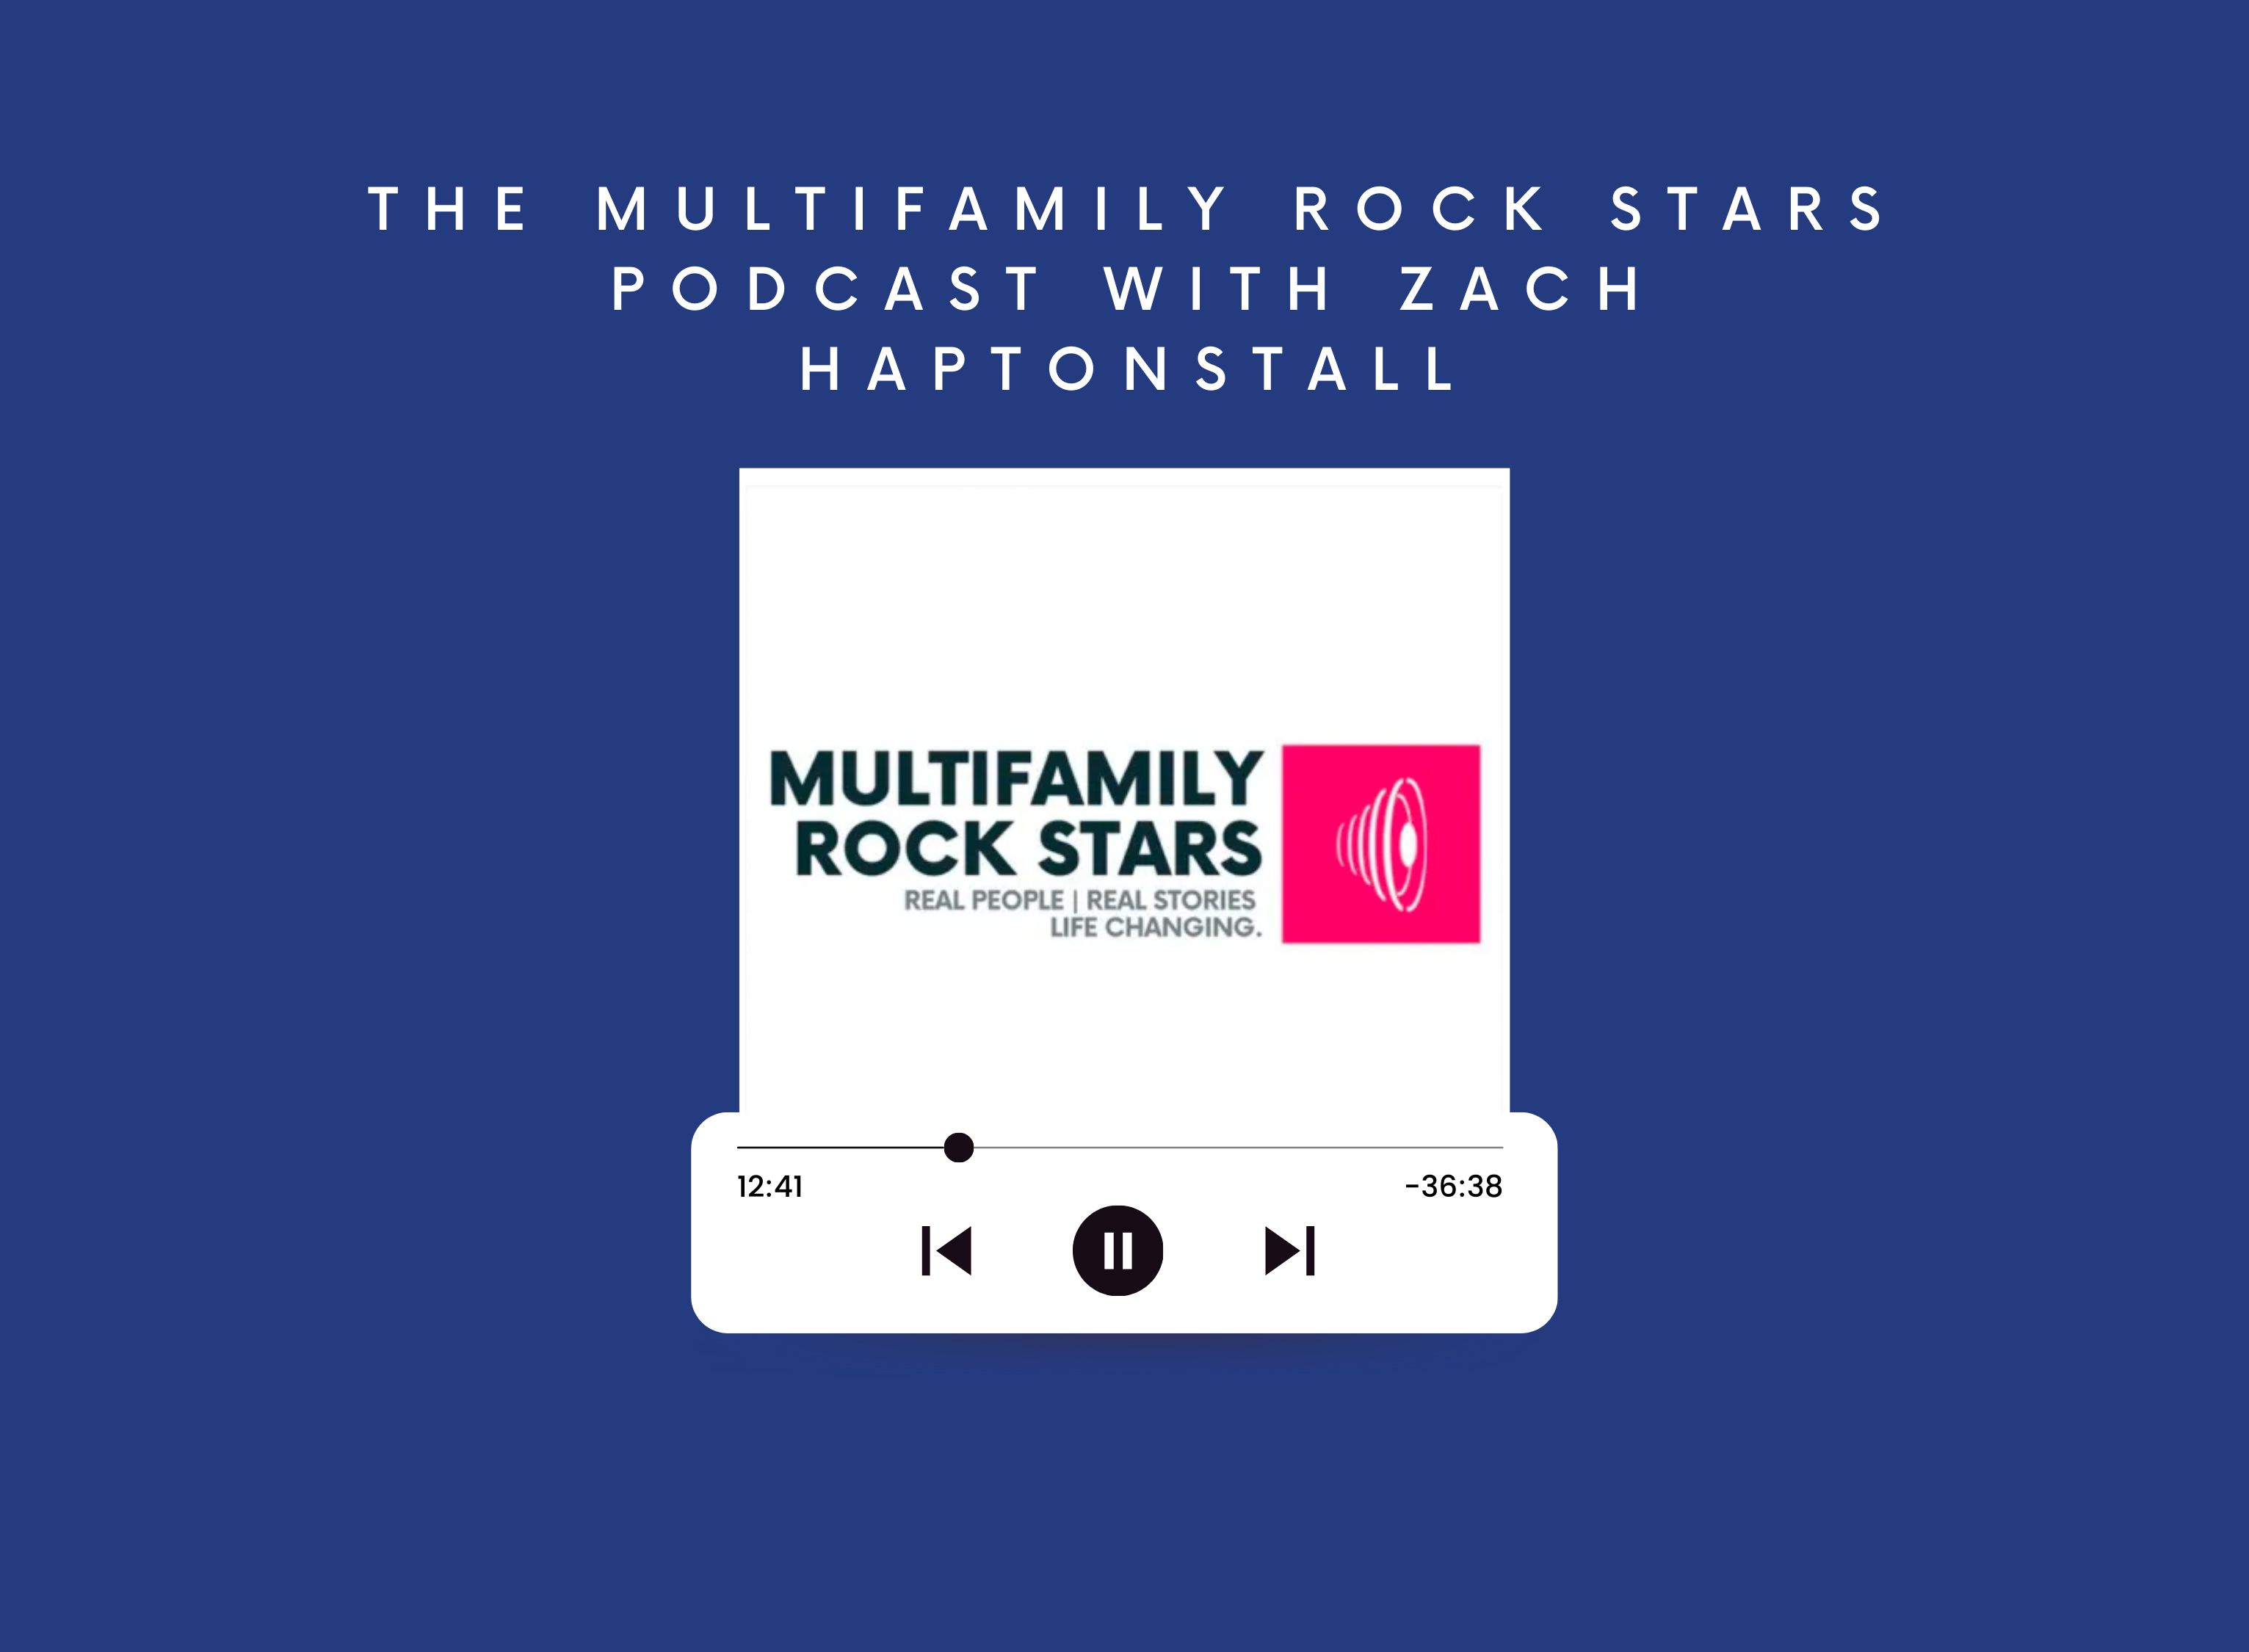 The Multifamily Rock Stars Podcast